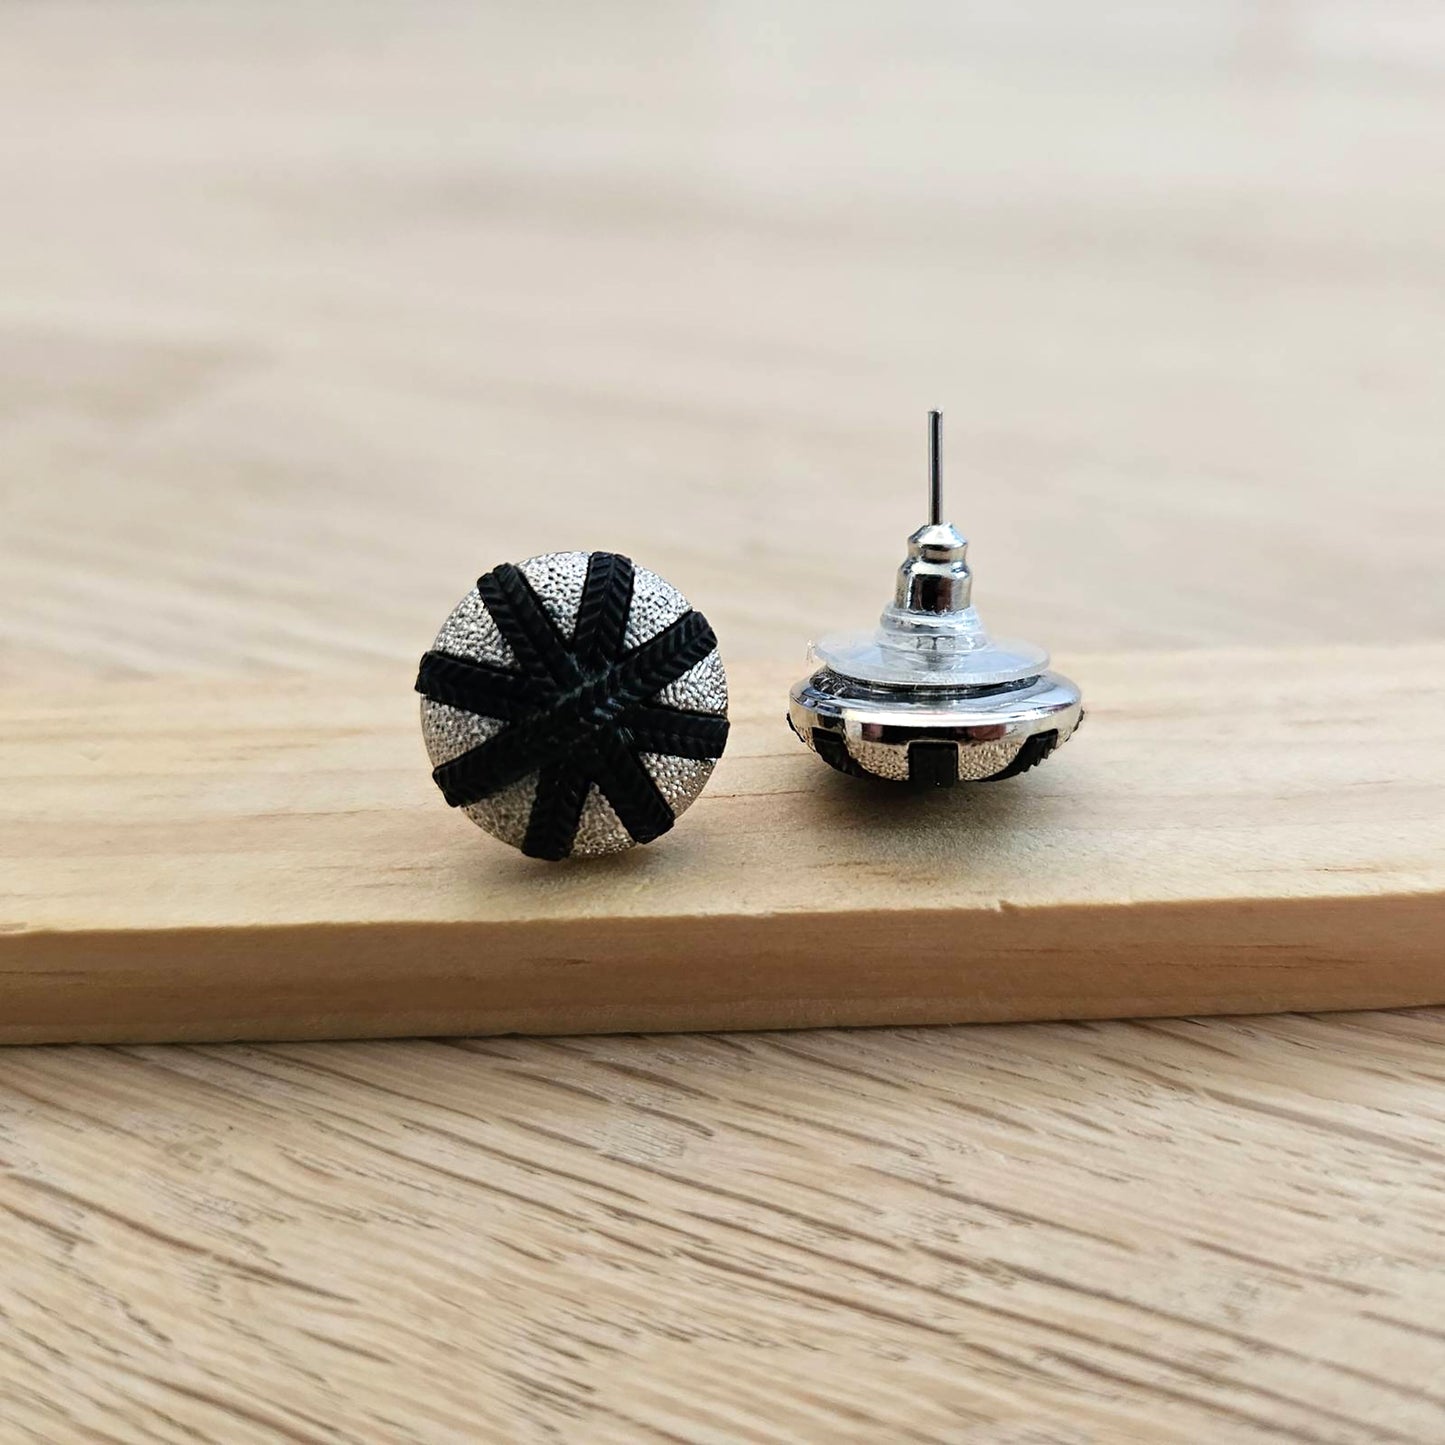 Star Stud earrings, Round Black Silver post, Recycled vintage button